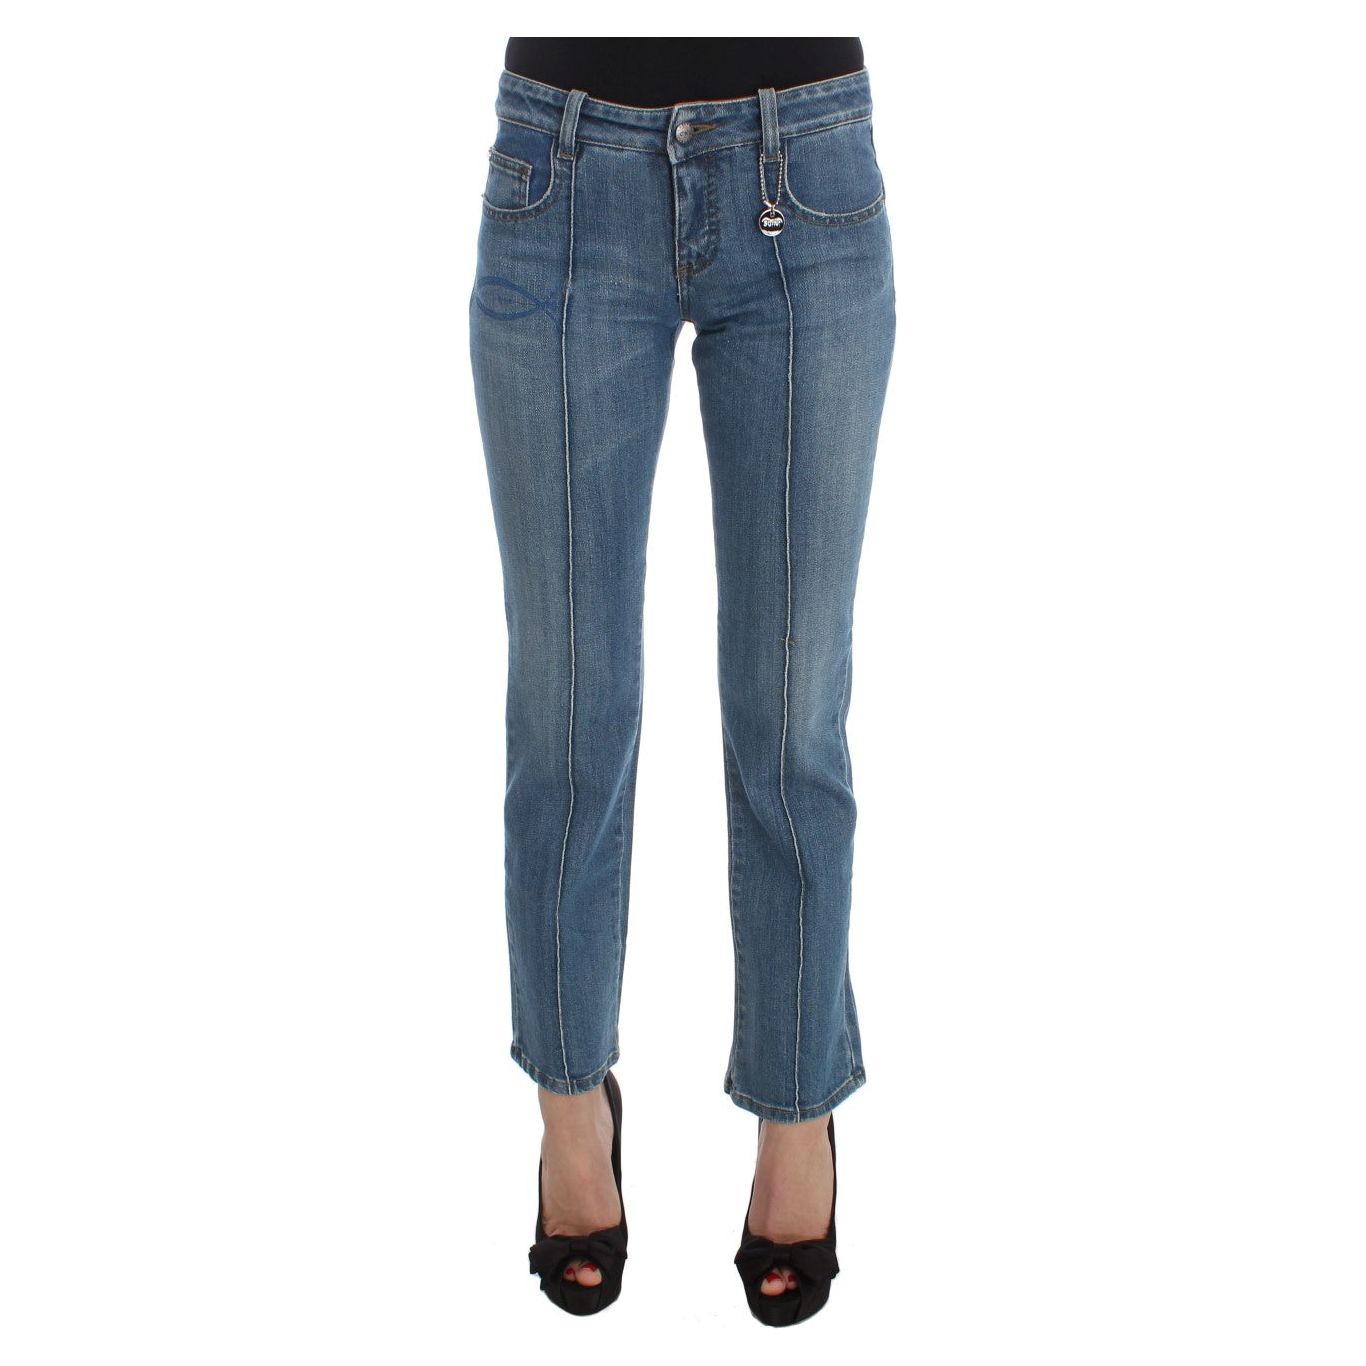 Costume National Chic Slim Fit Blue Jeans for the Modern Woman Jeans & Pants blue-cotton-slim-fit-cropped-jeans 318503-blue-cotton-slim-fit-cropped-jeans.jpg